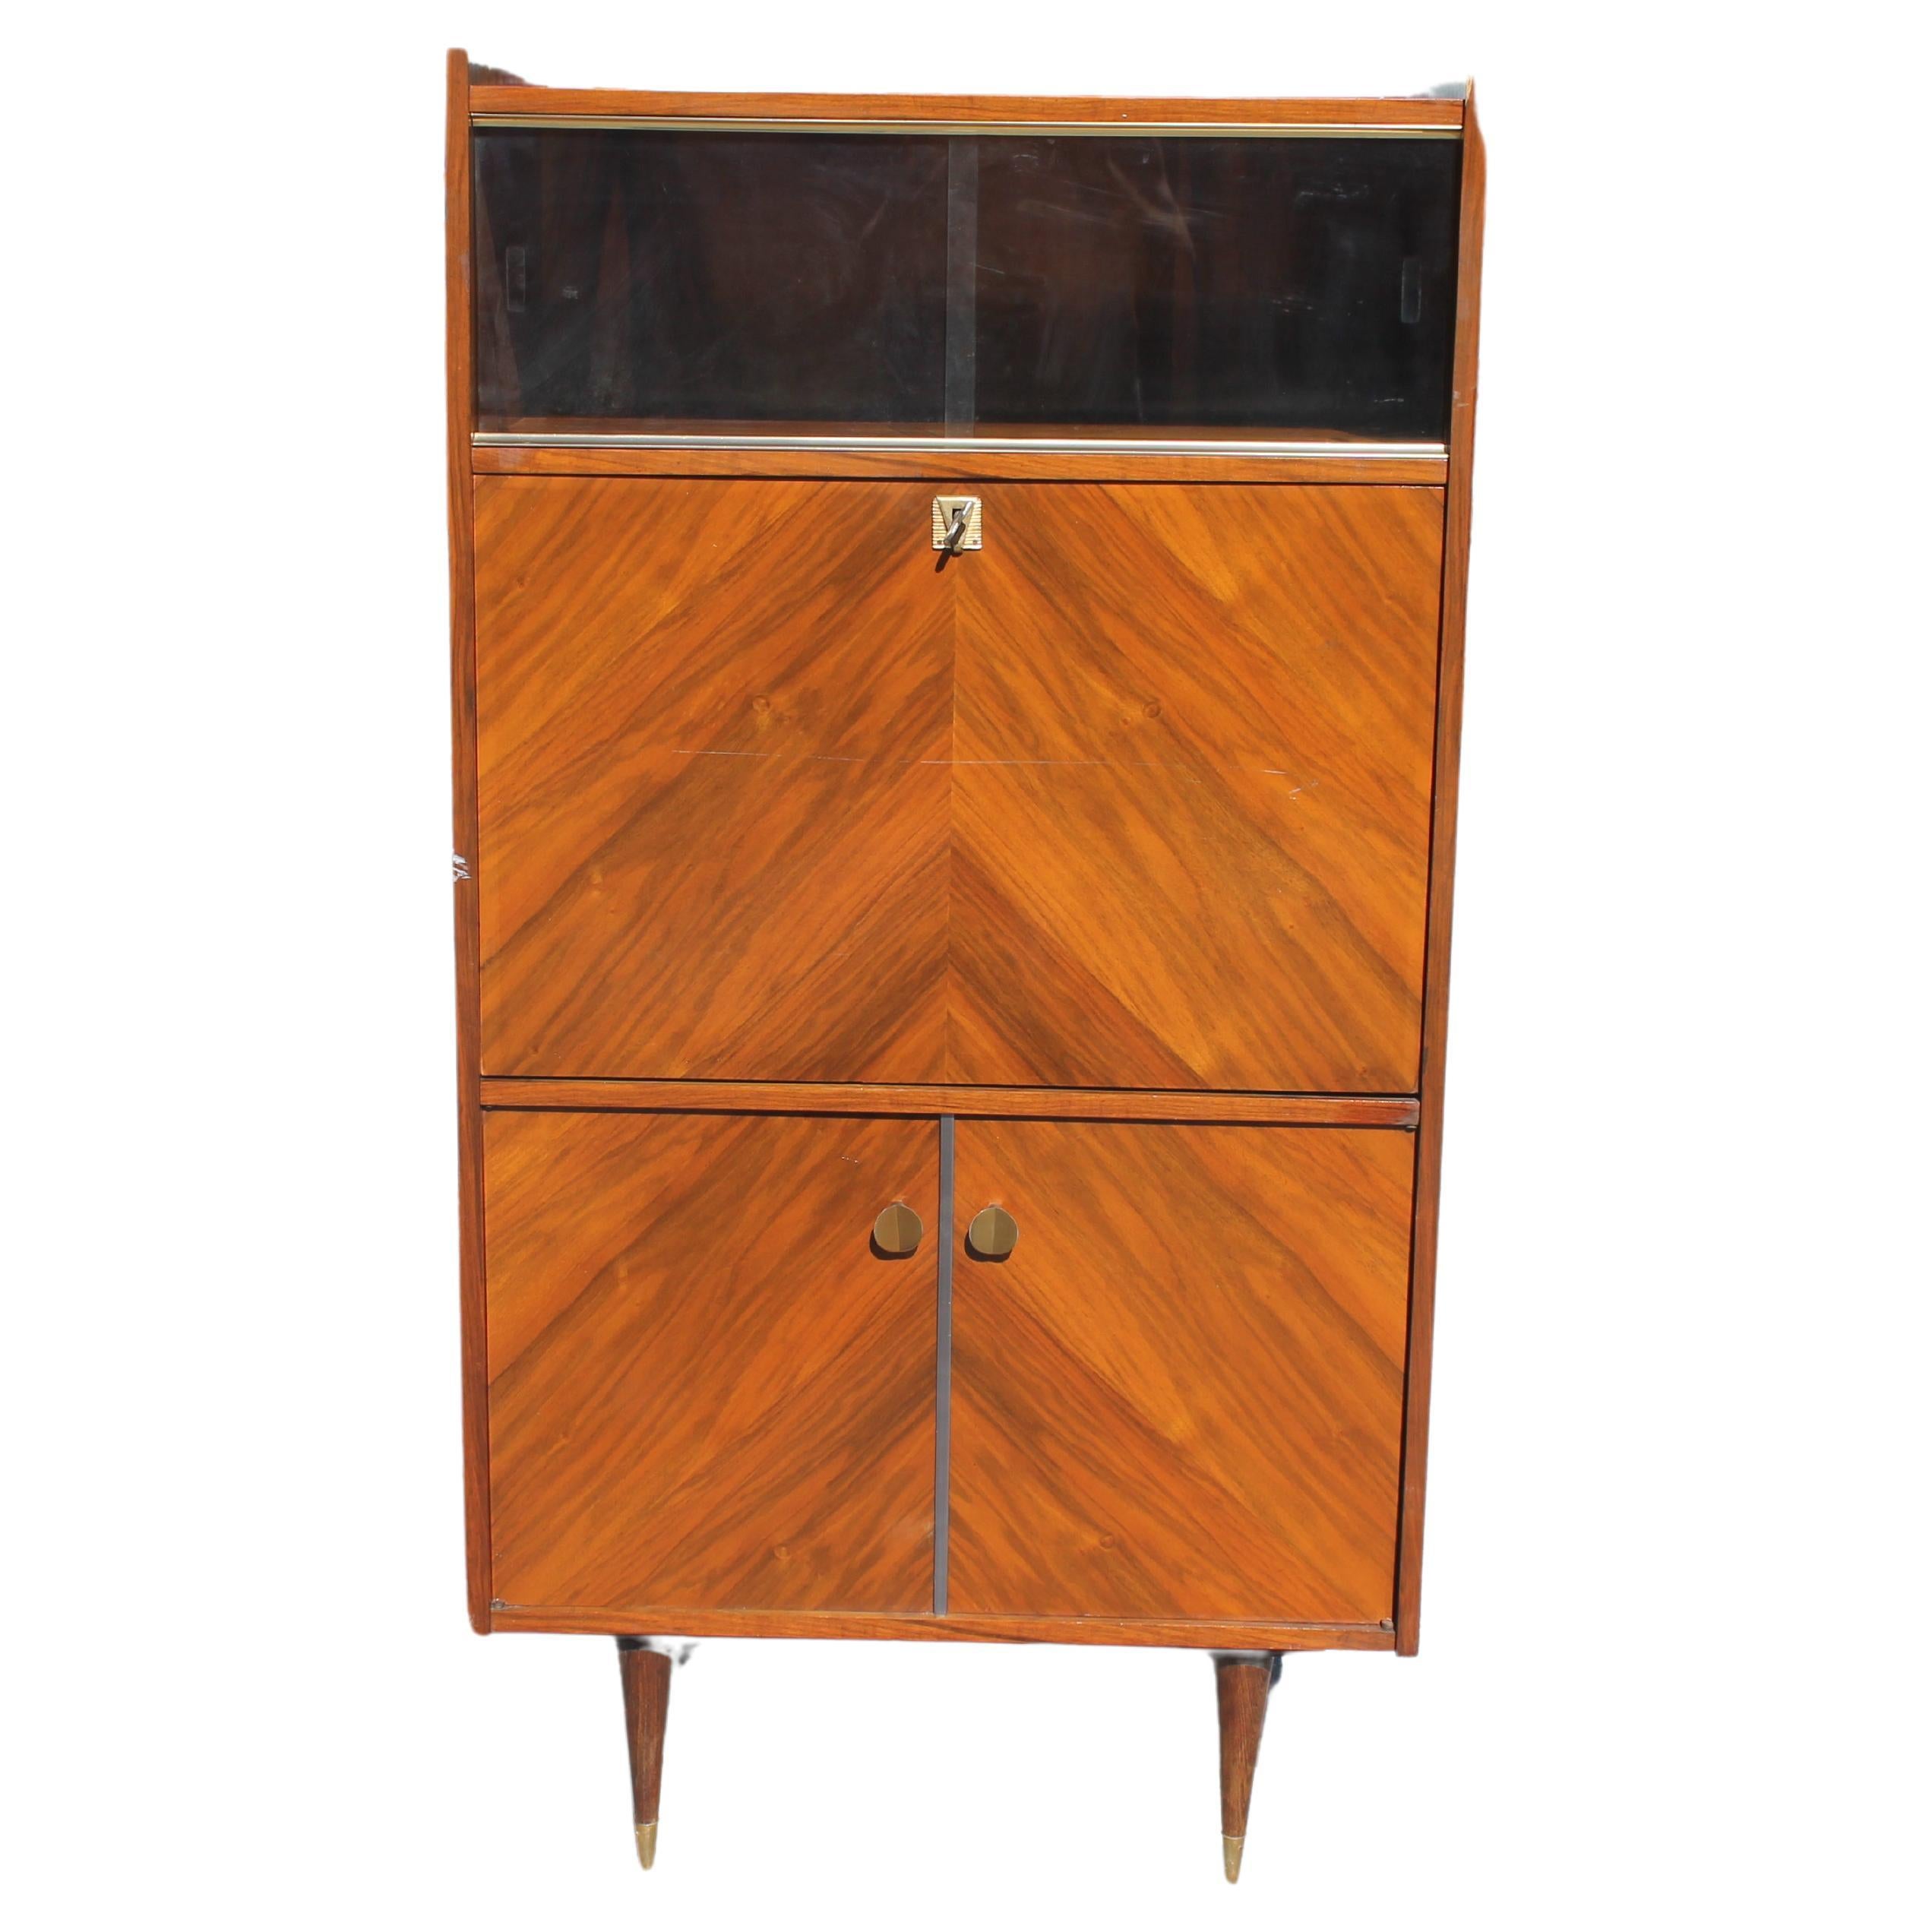 1940's French Art Deco Exotic Rosewood Secretary Cabinet For Sale